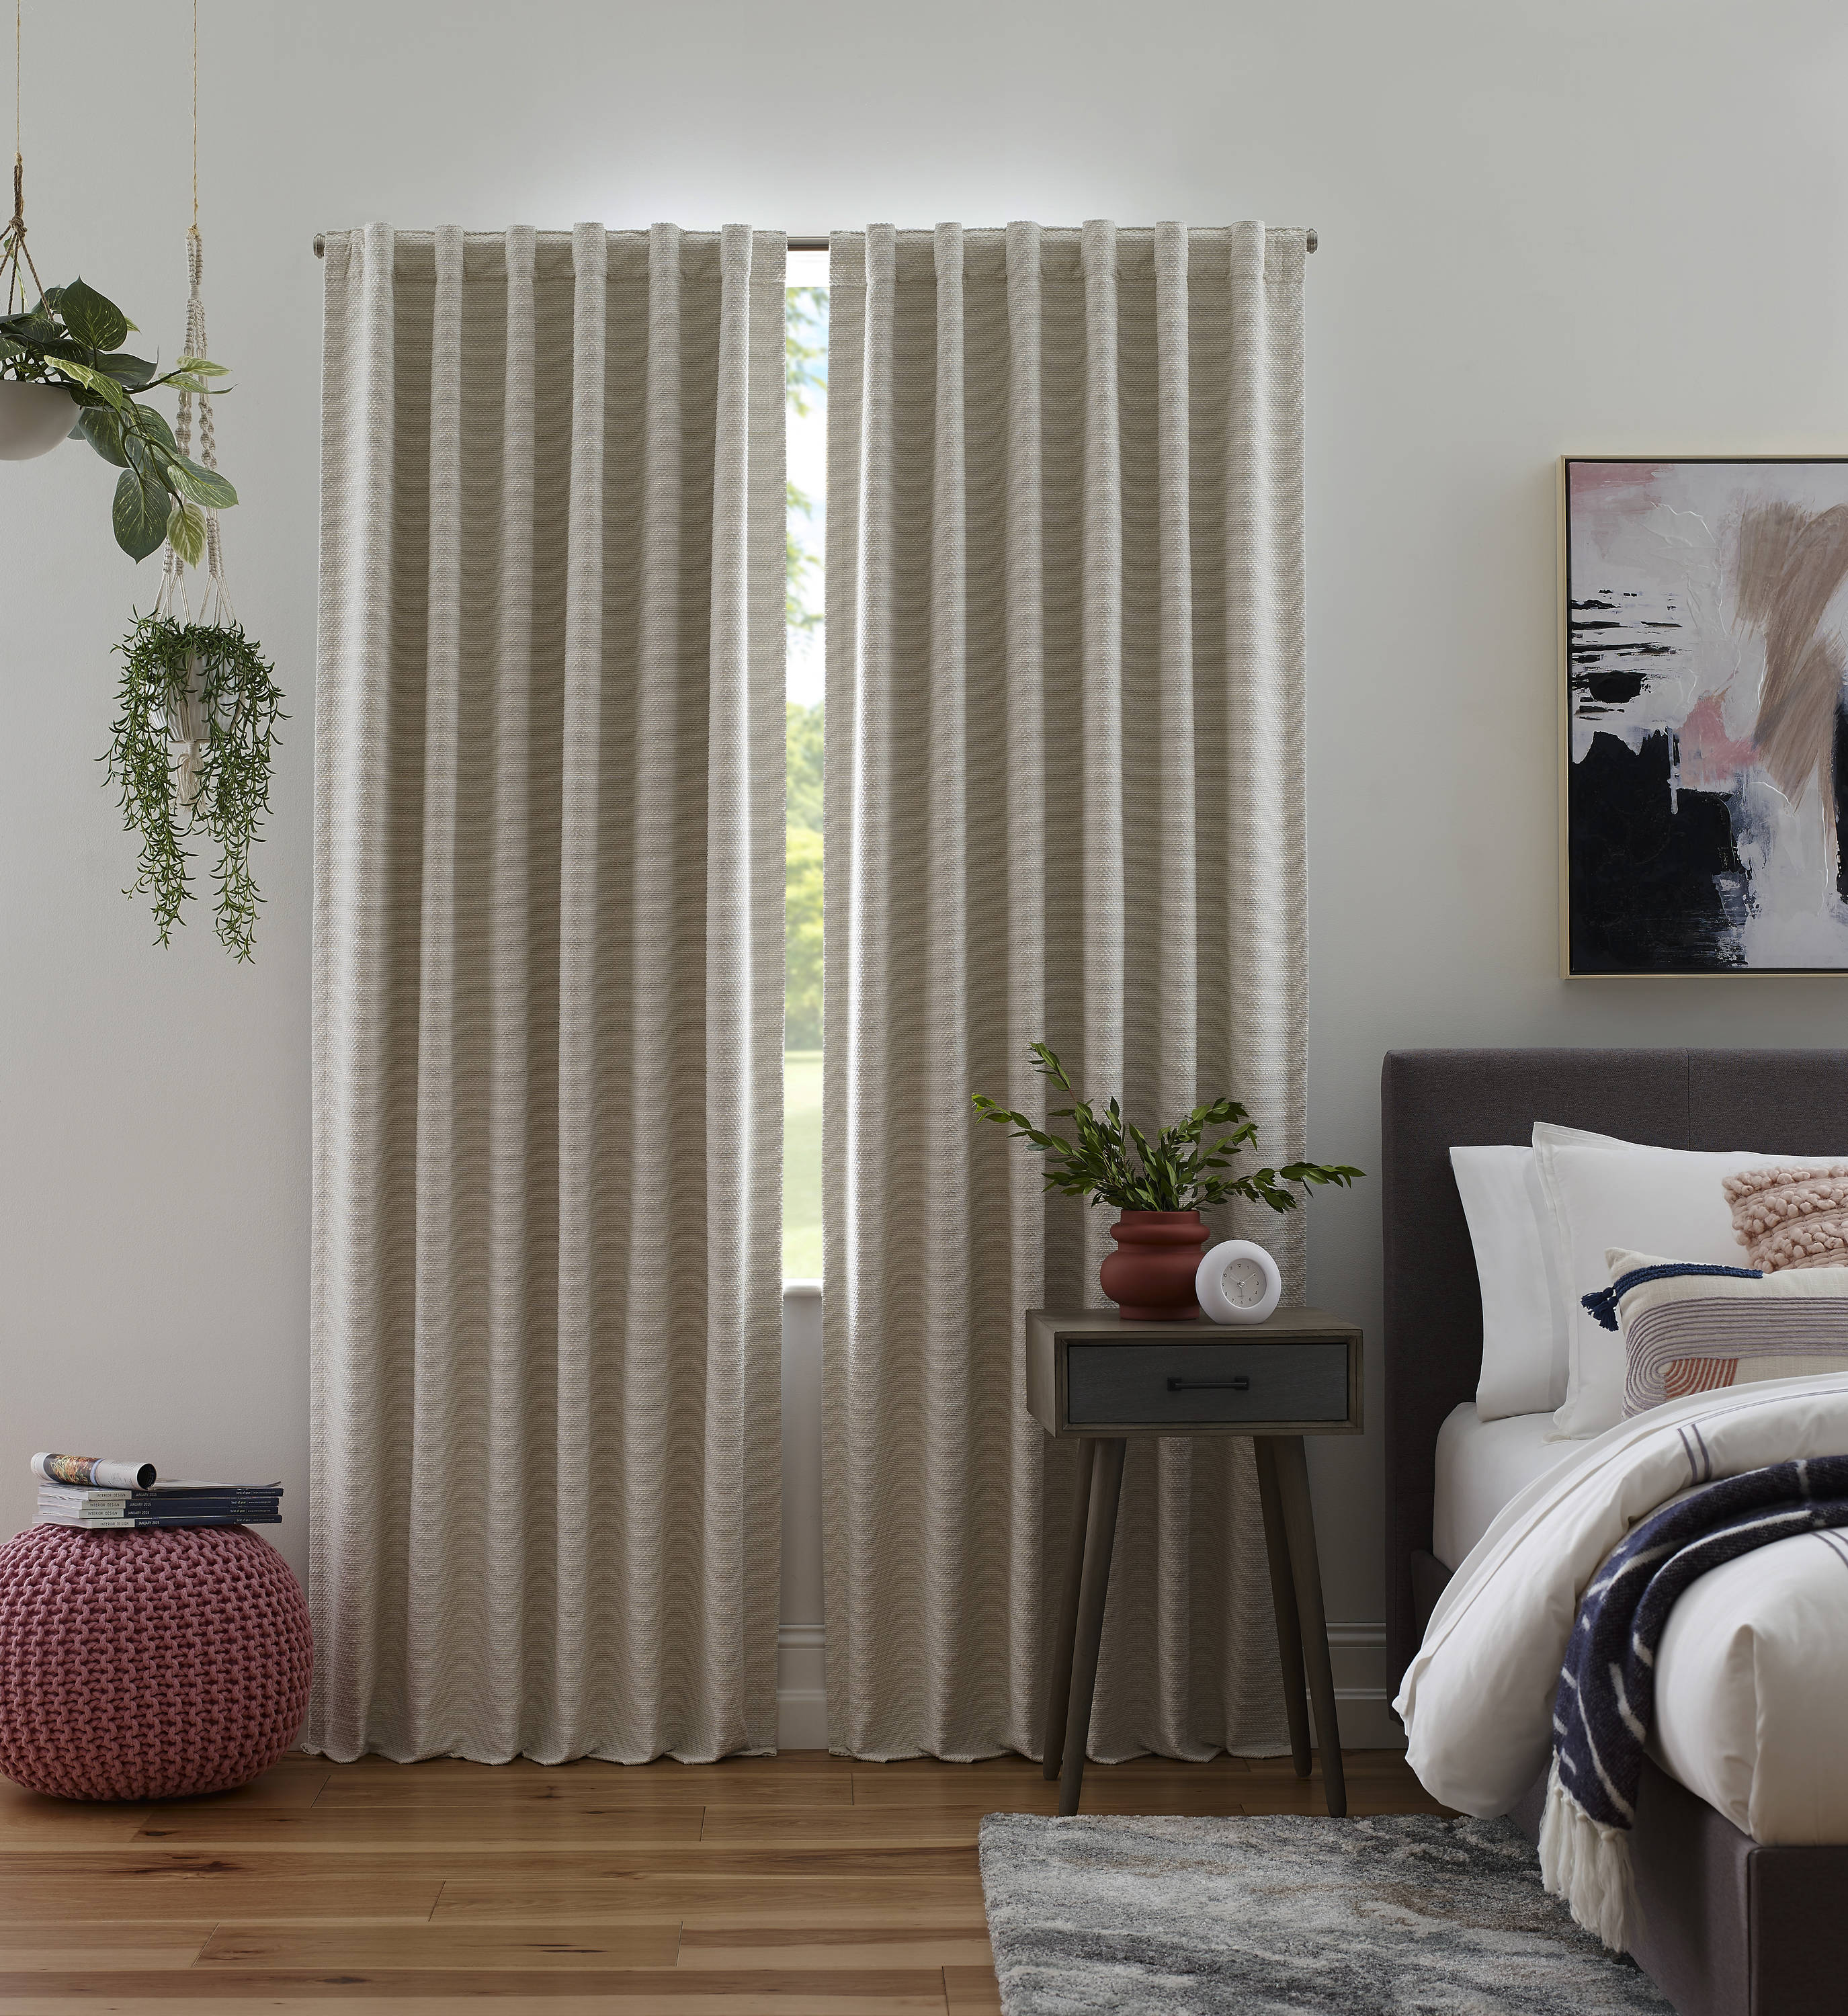 the department & 21 Back Blackout Origin Single Curtain at Tab Ivory Curtains 84-in in Panel Thermal Drapes Lined